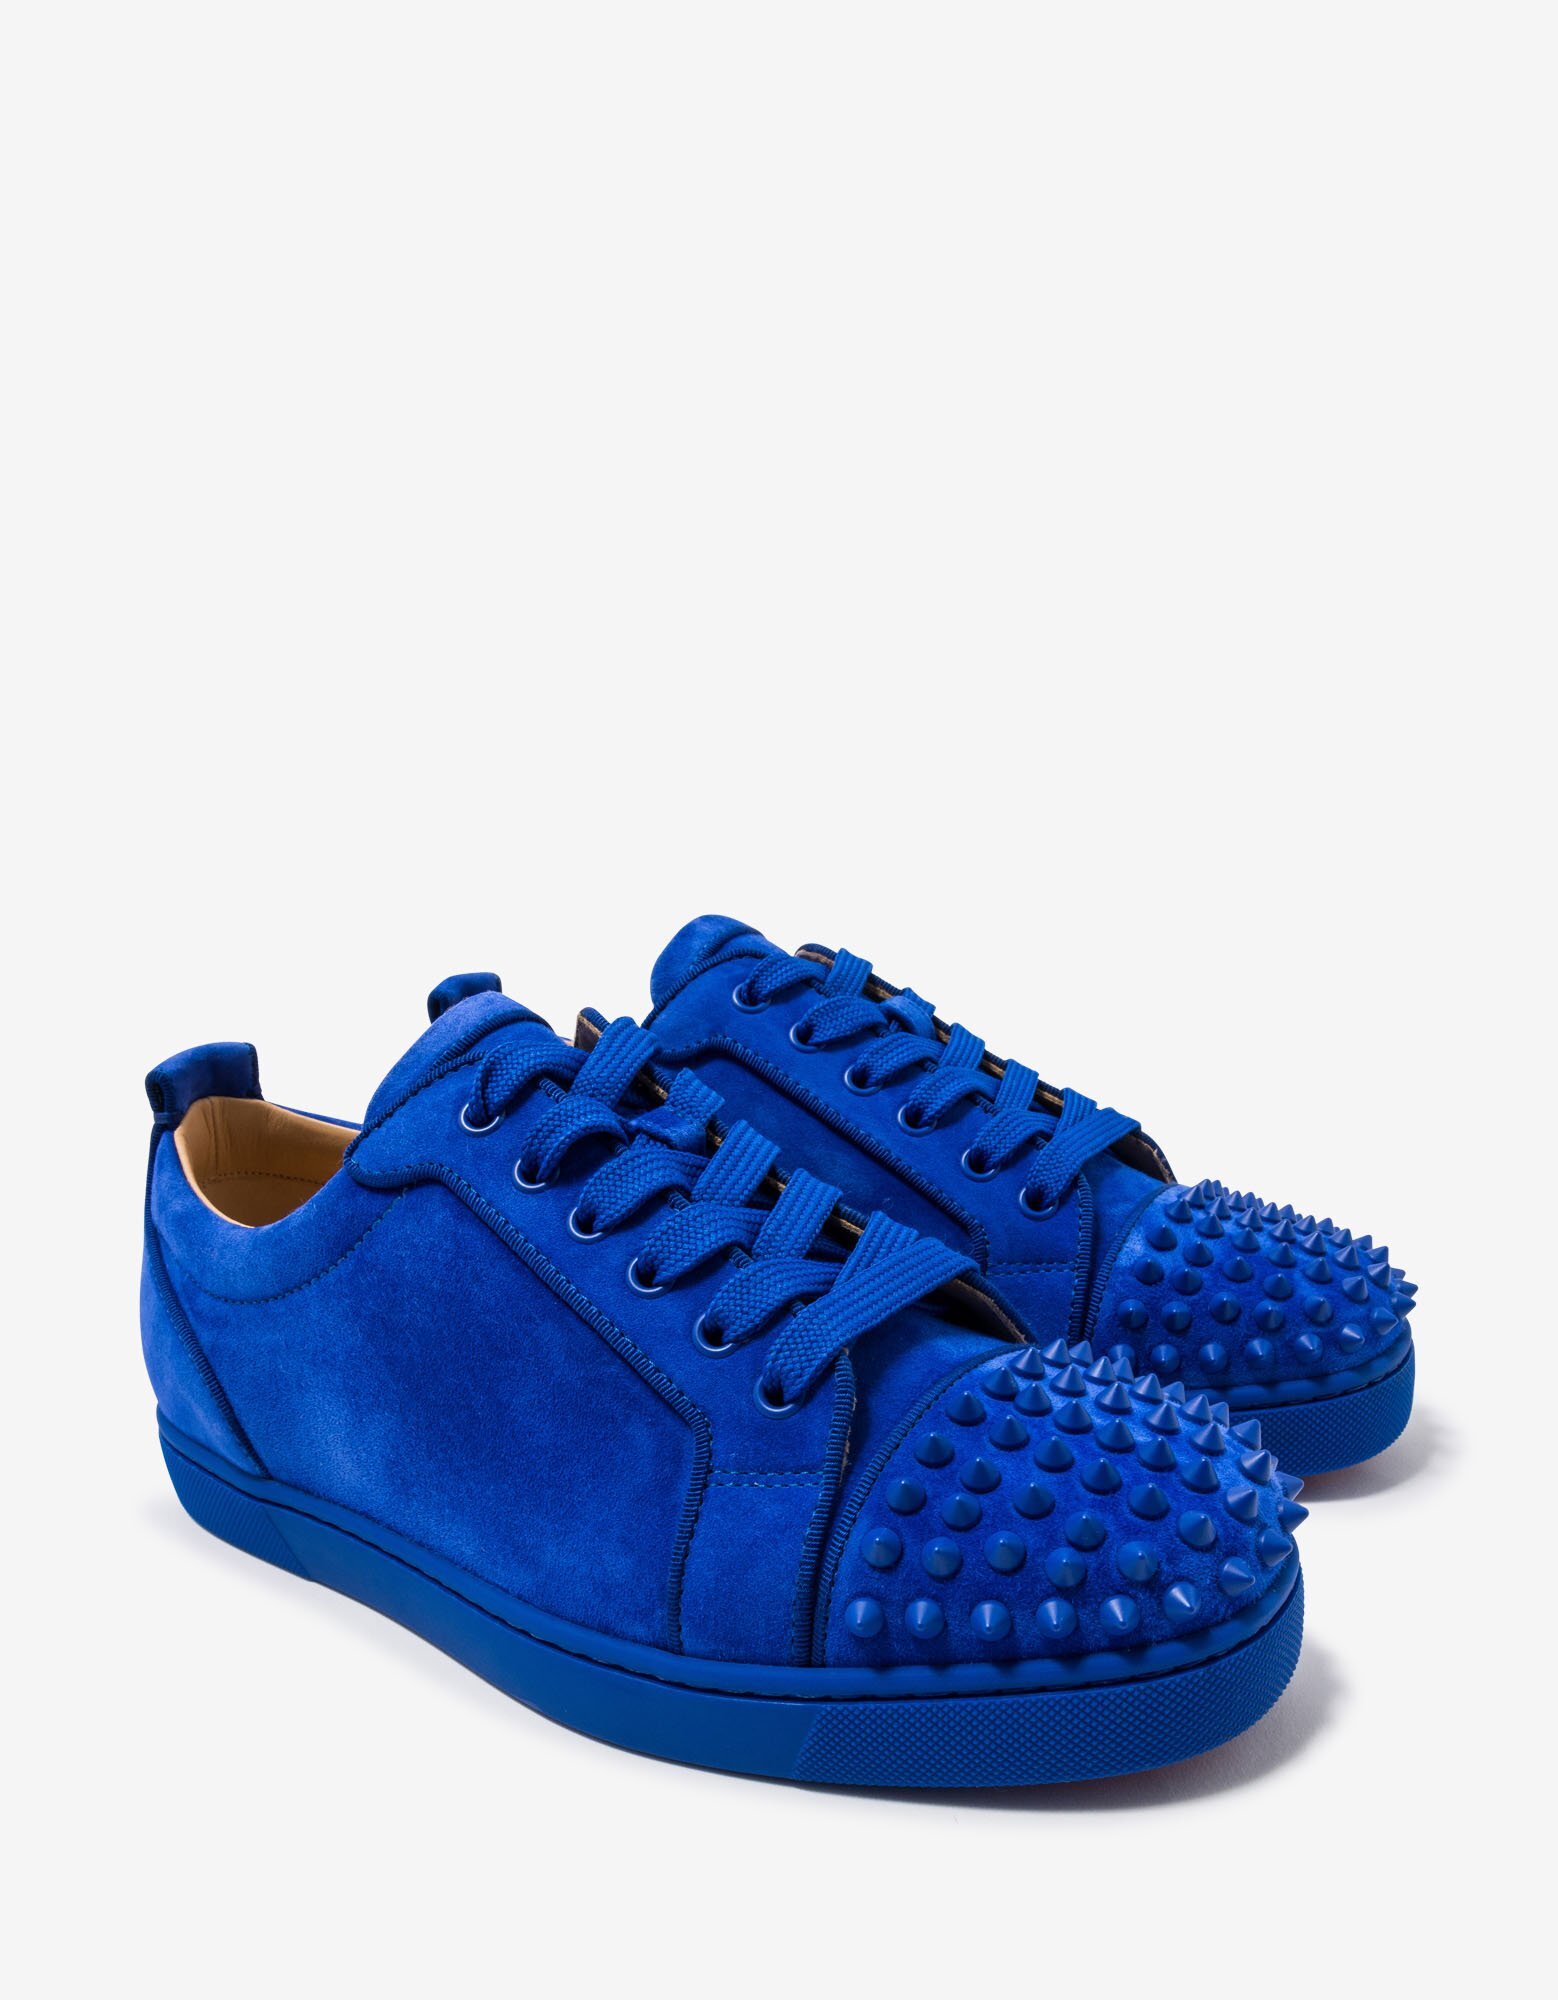 Christian Louboutin<br/><br/>Louis Junior Spikes Orlato Blue Suede